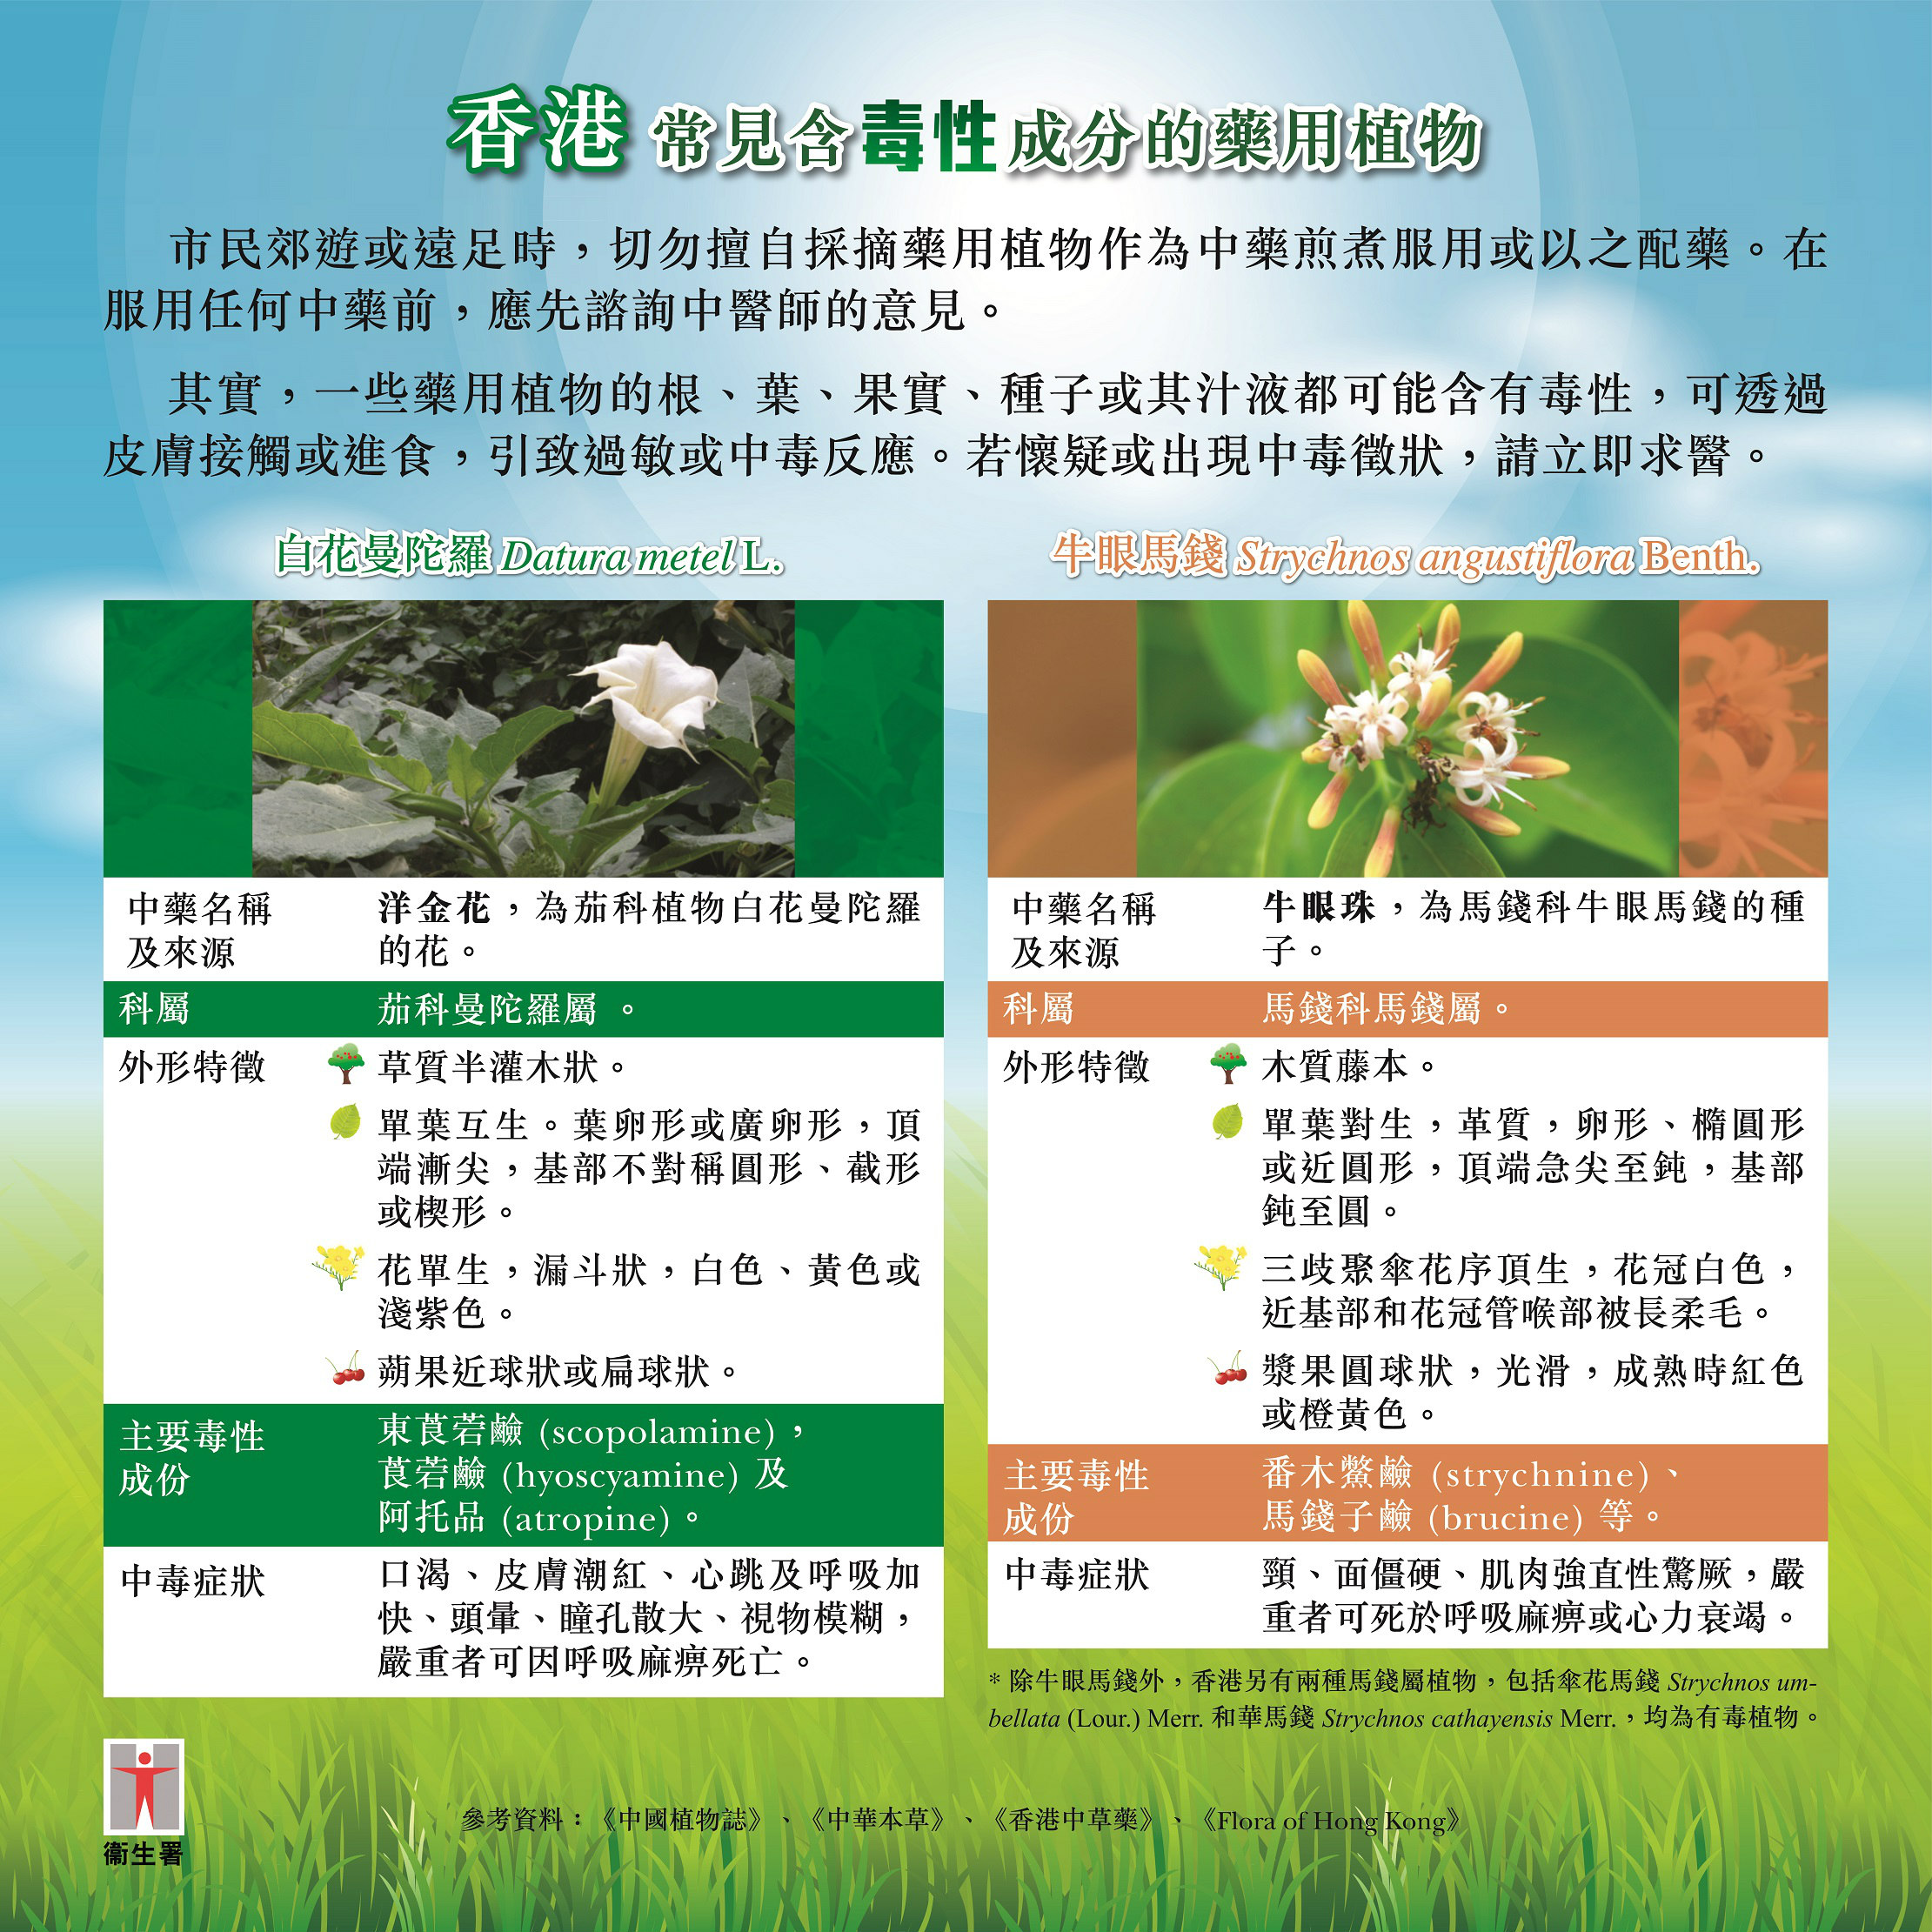 Common Toxic Plants in Hong Kong (Chinese version only)